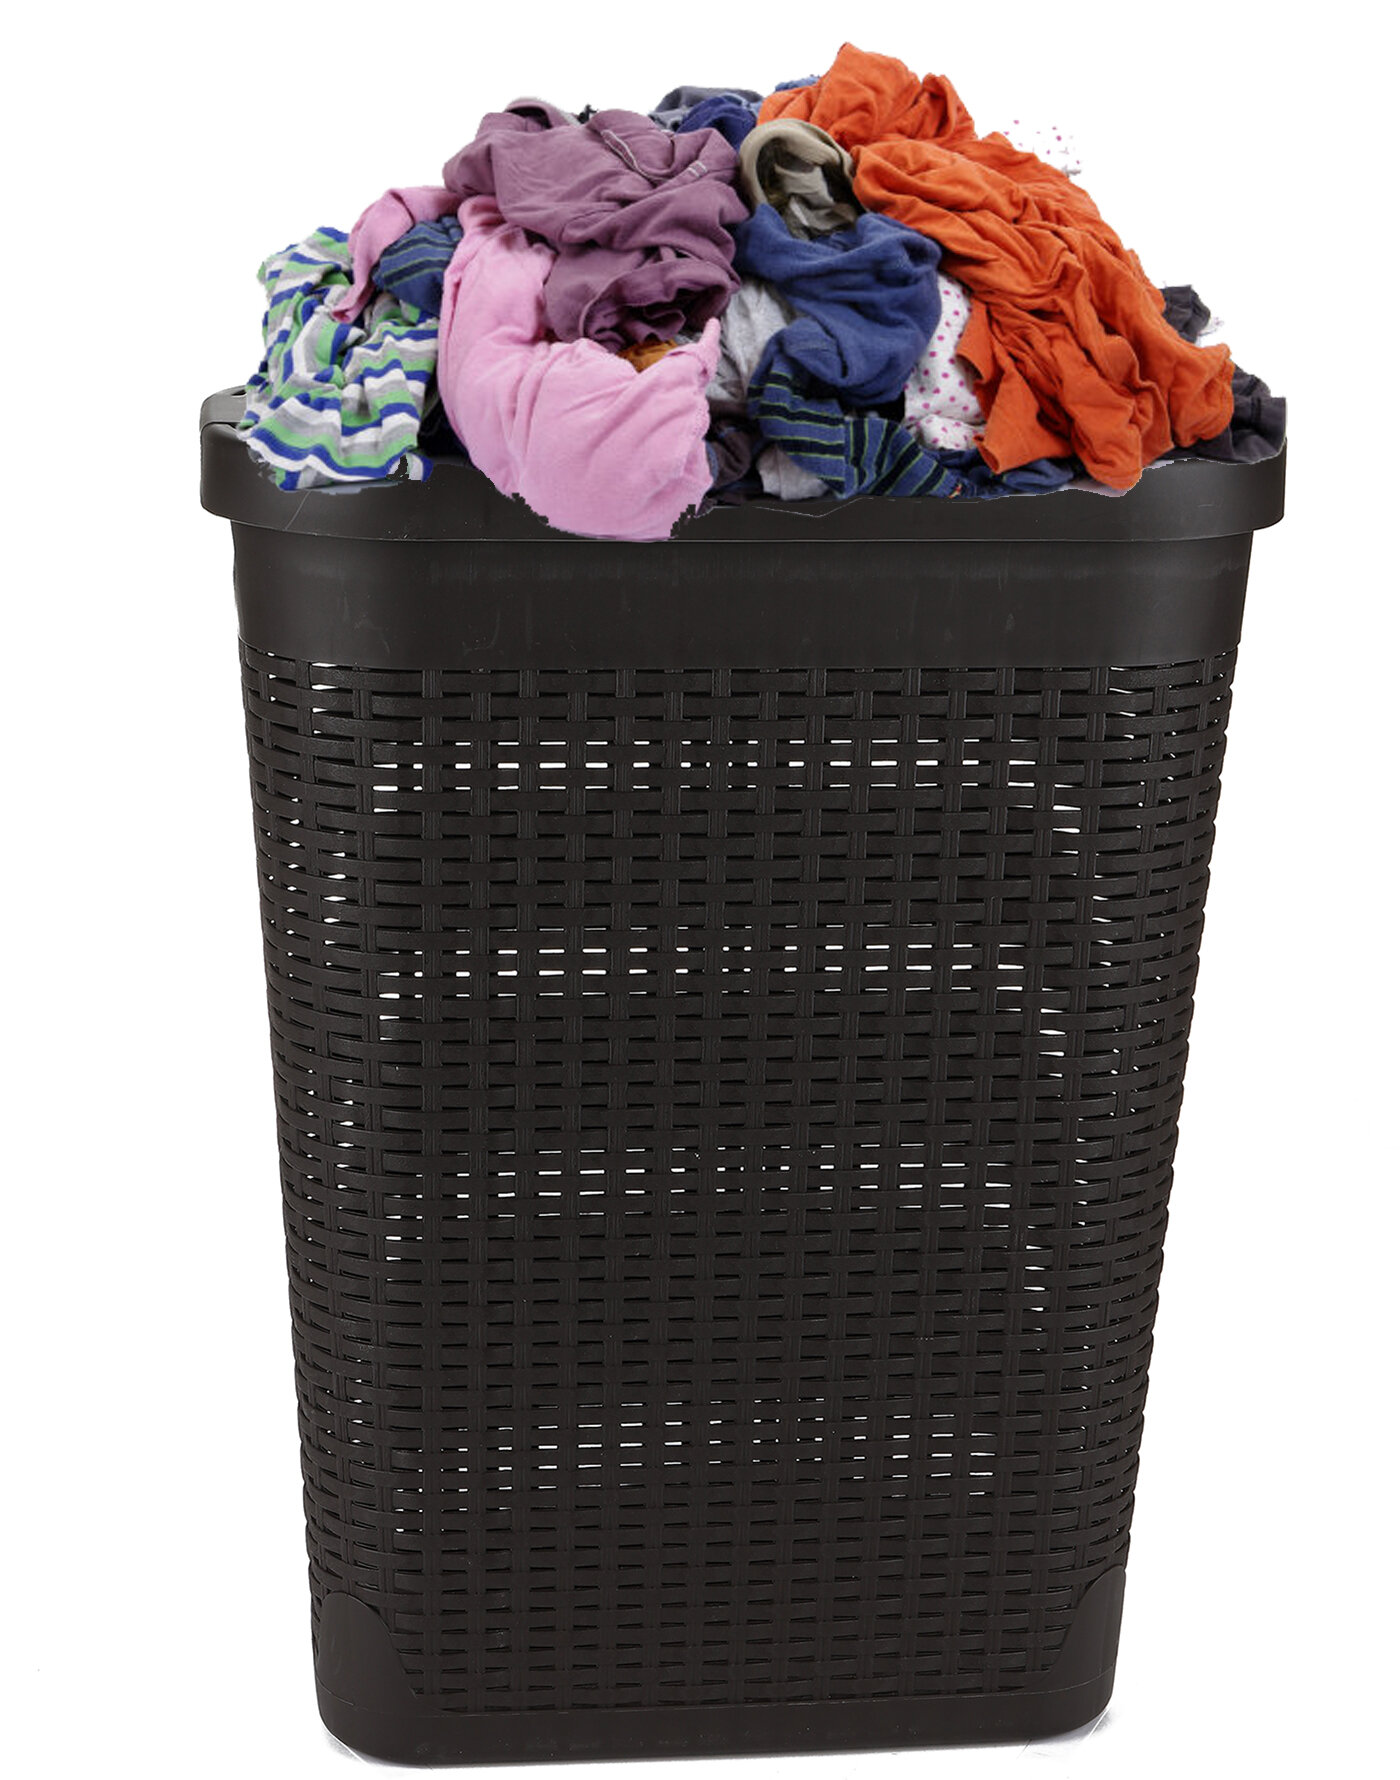 dirty clothes basket